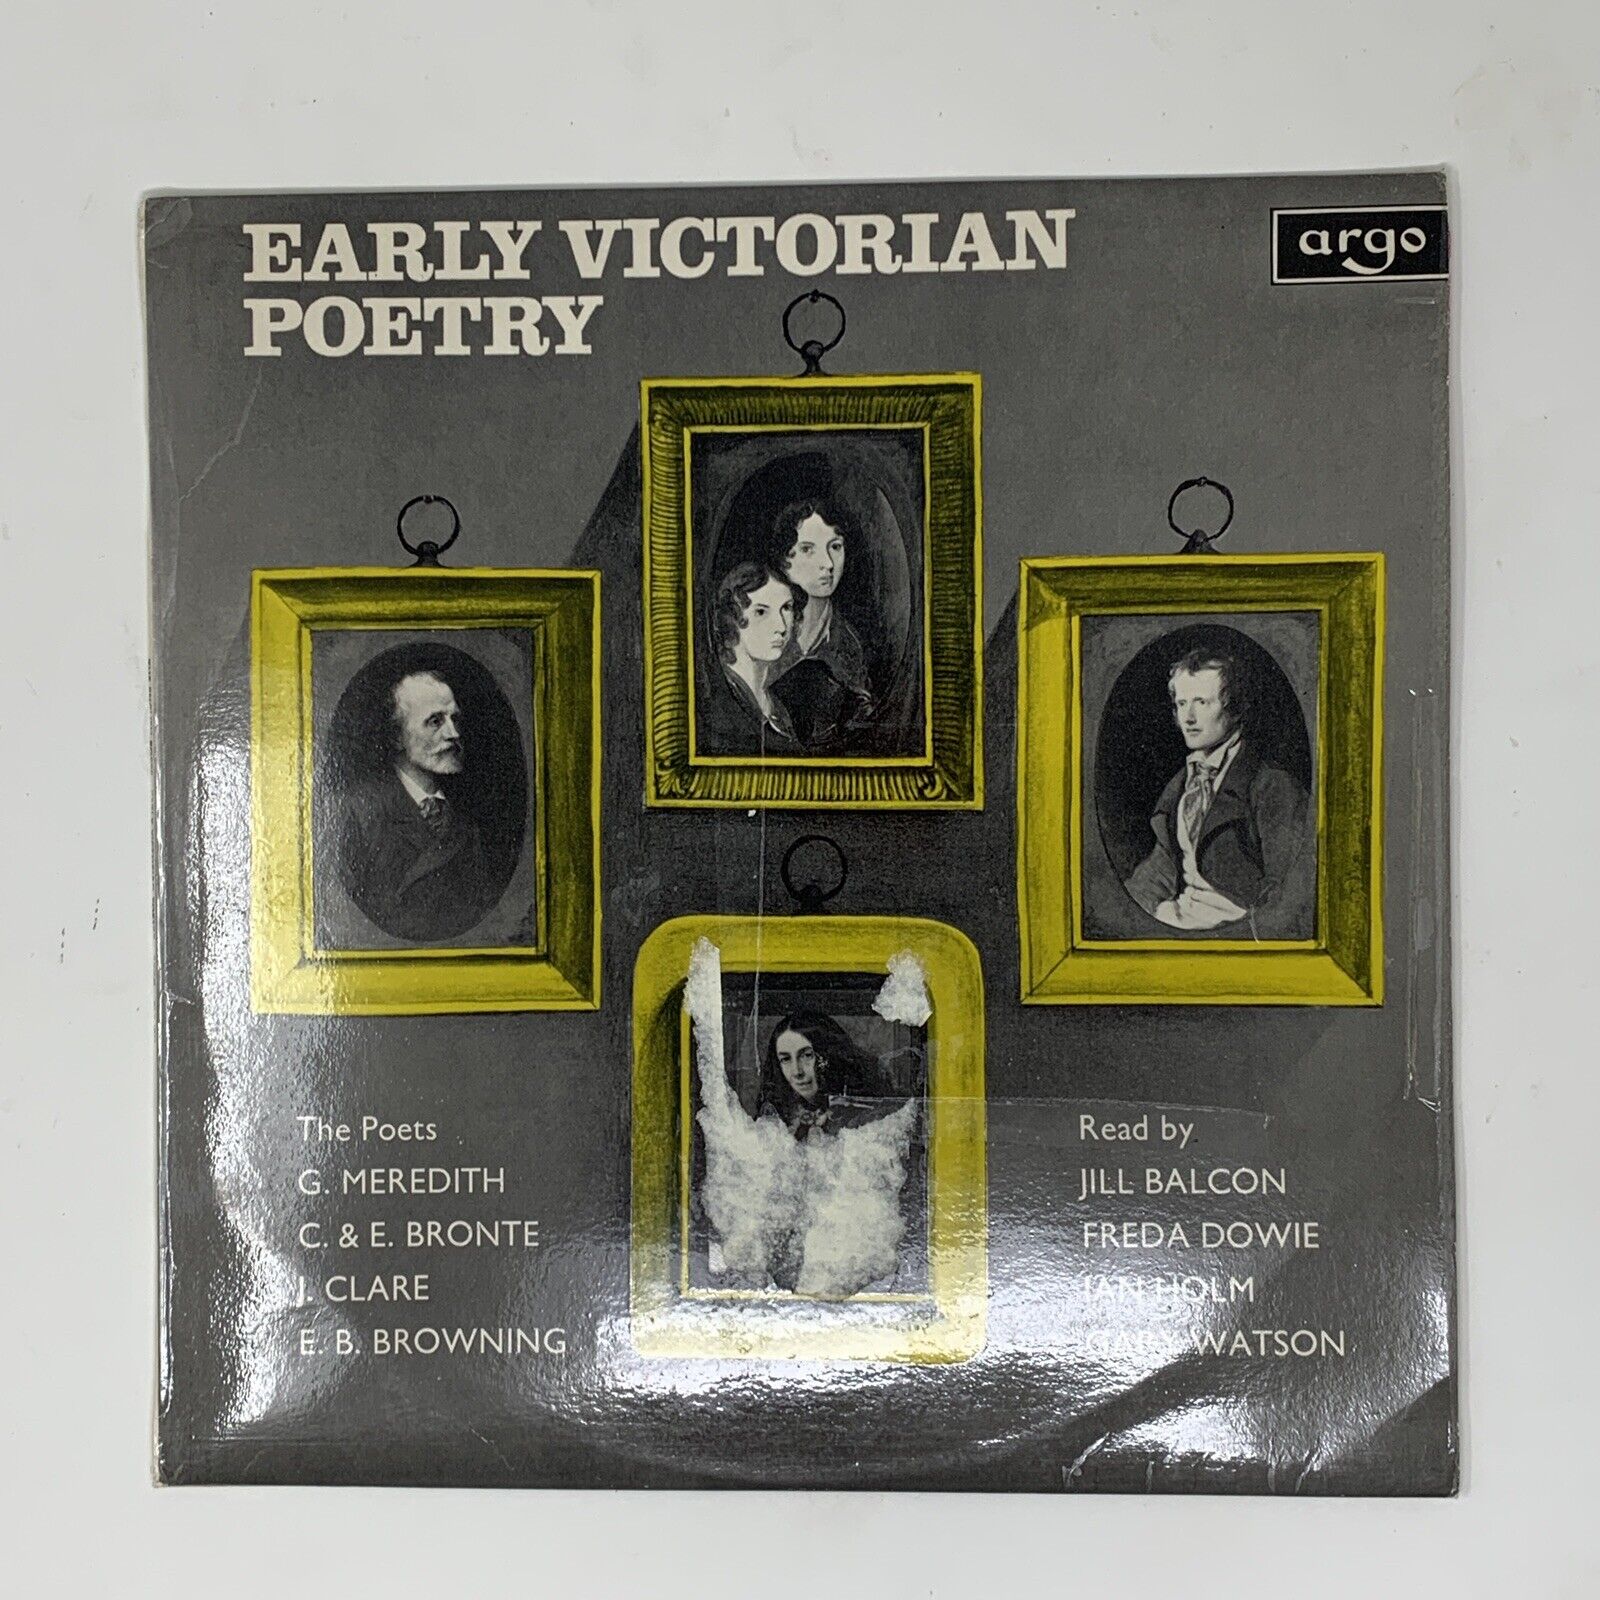 Early Victorian Poetry Vinyl Record Album Bronte Browning Meredith Clare PLP1044